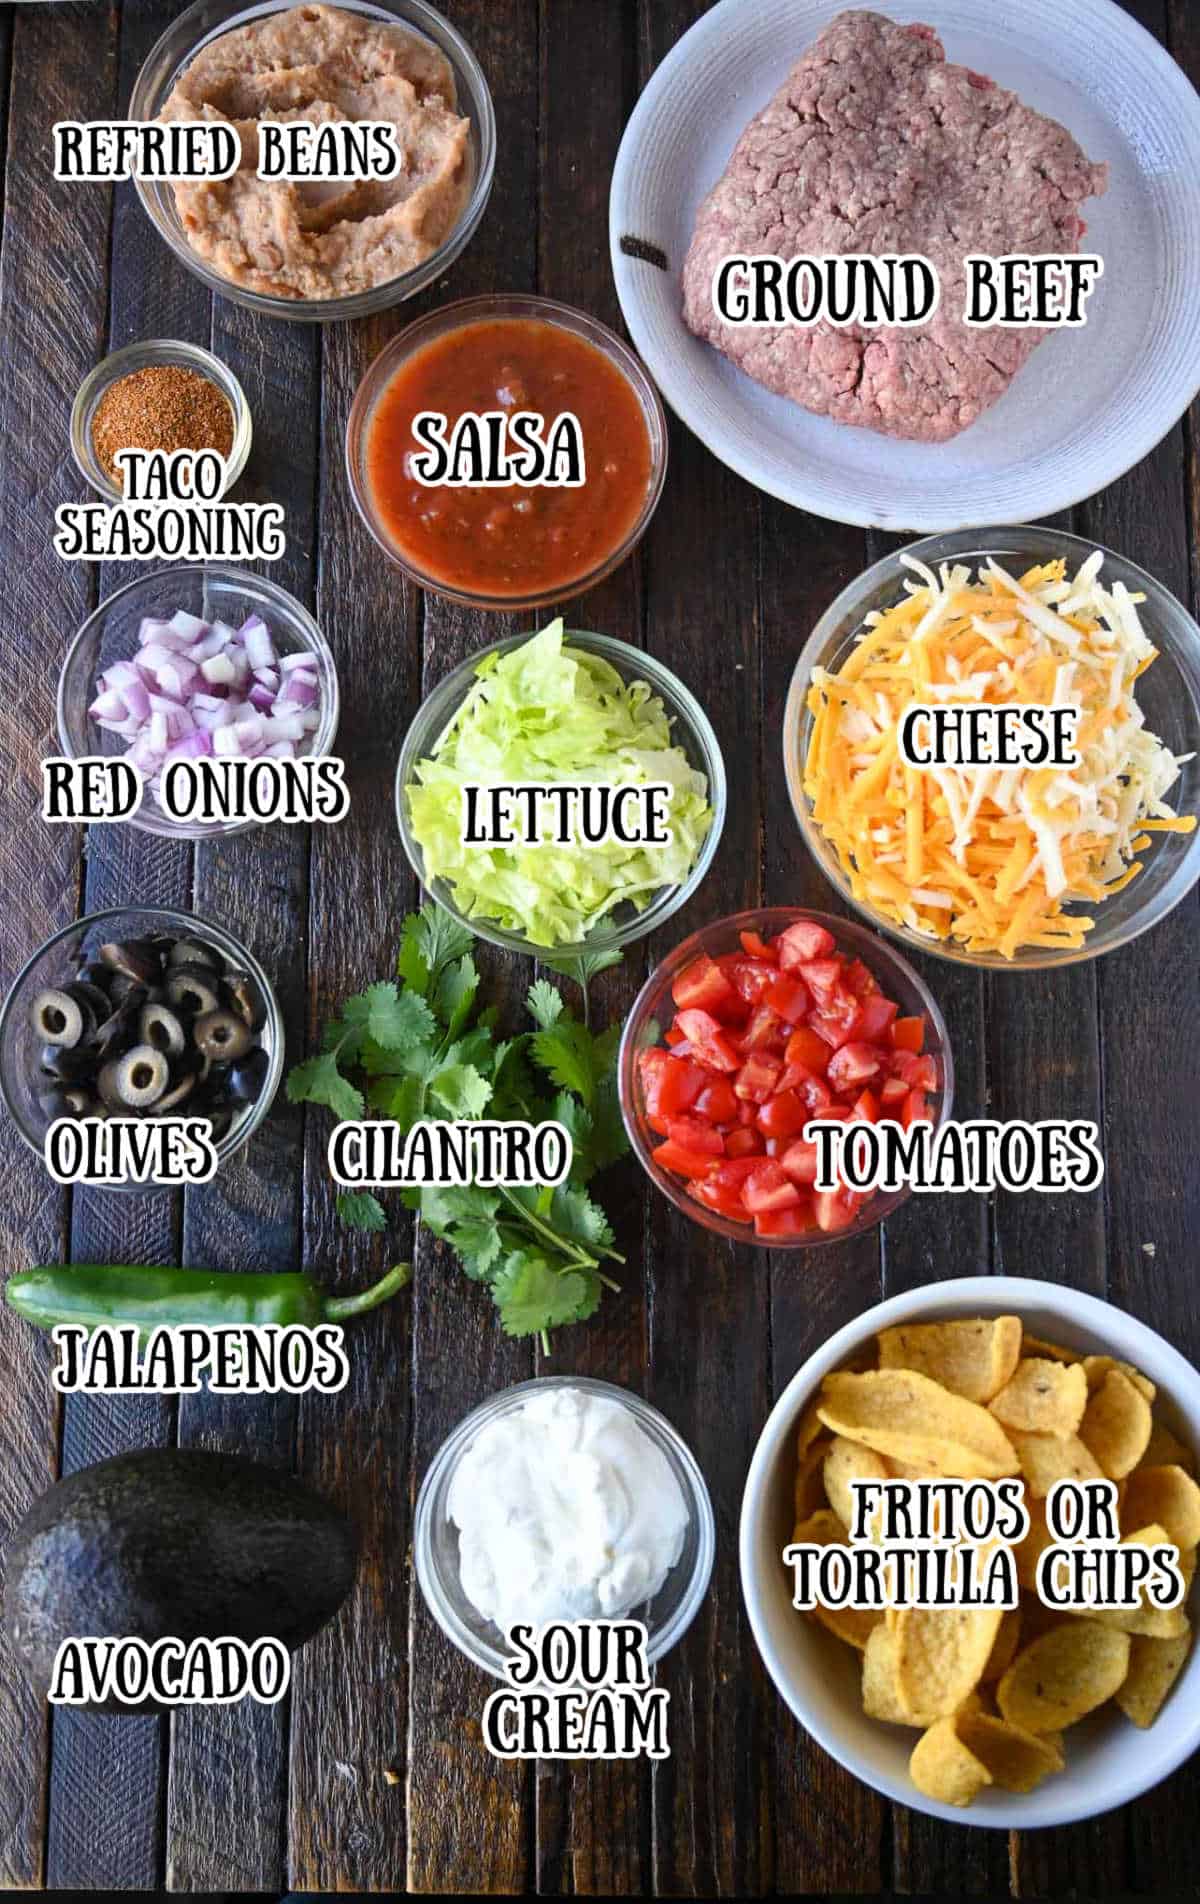 All the ingredients needed for this taco dip.